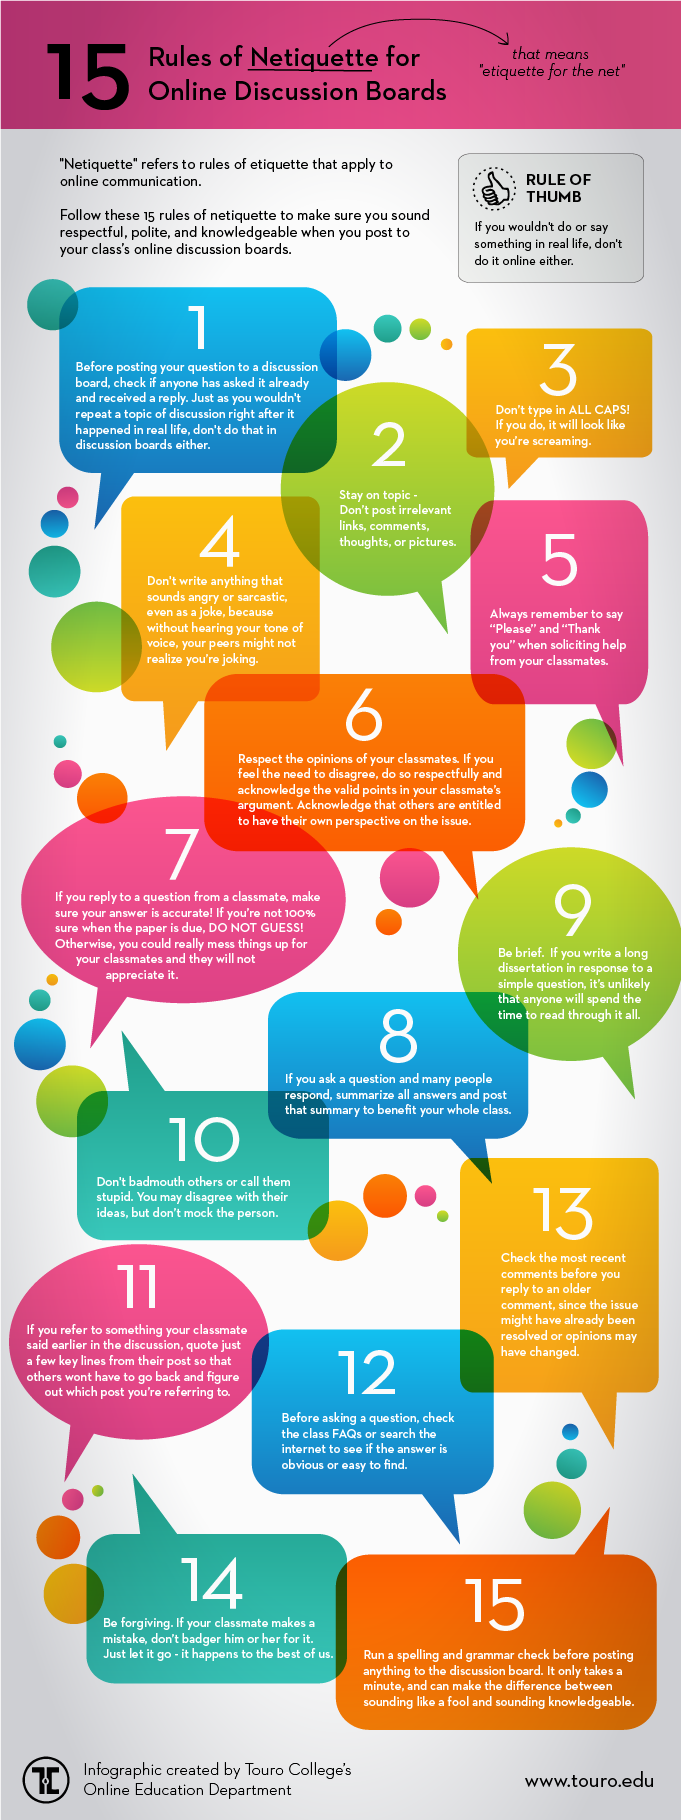 15 Rules of Netiquette for Online Discussion Boards